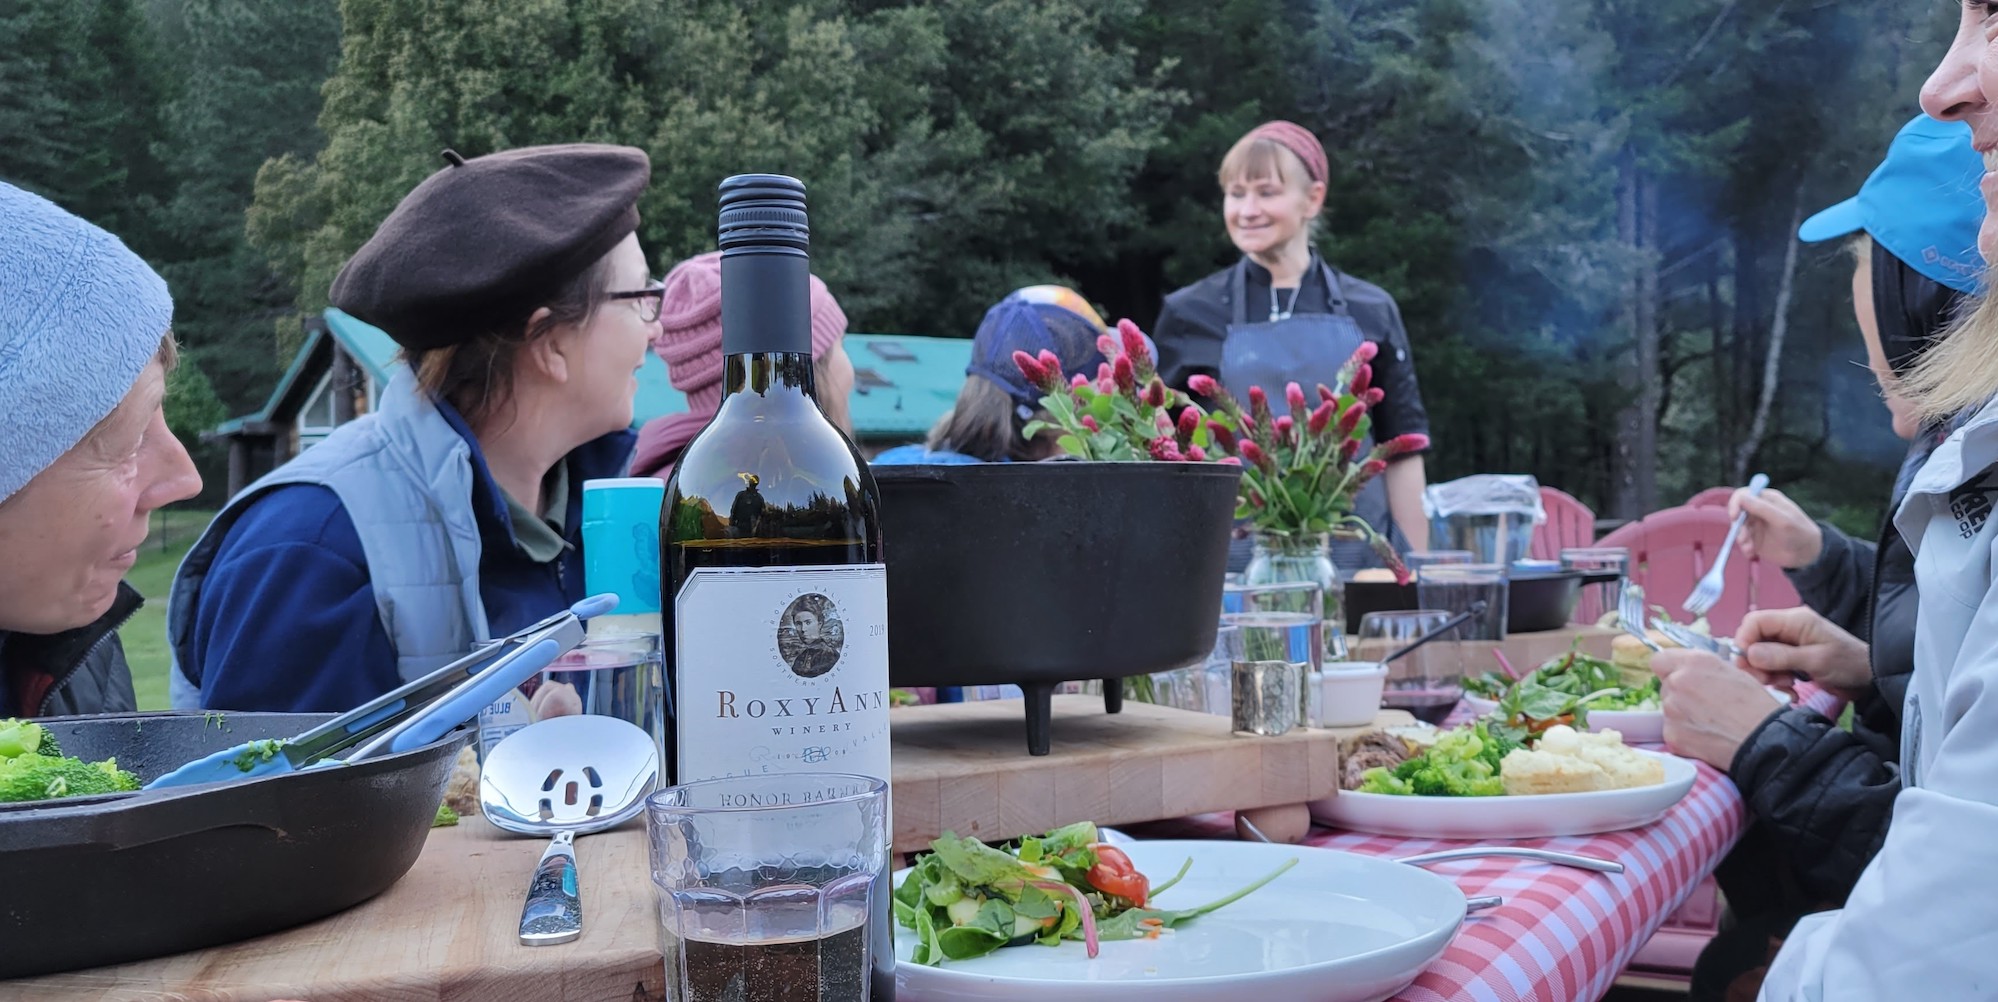 People around a wooden dining table outside eating dinner along the Rogue River with the chef at the head of the table standing up